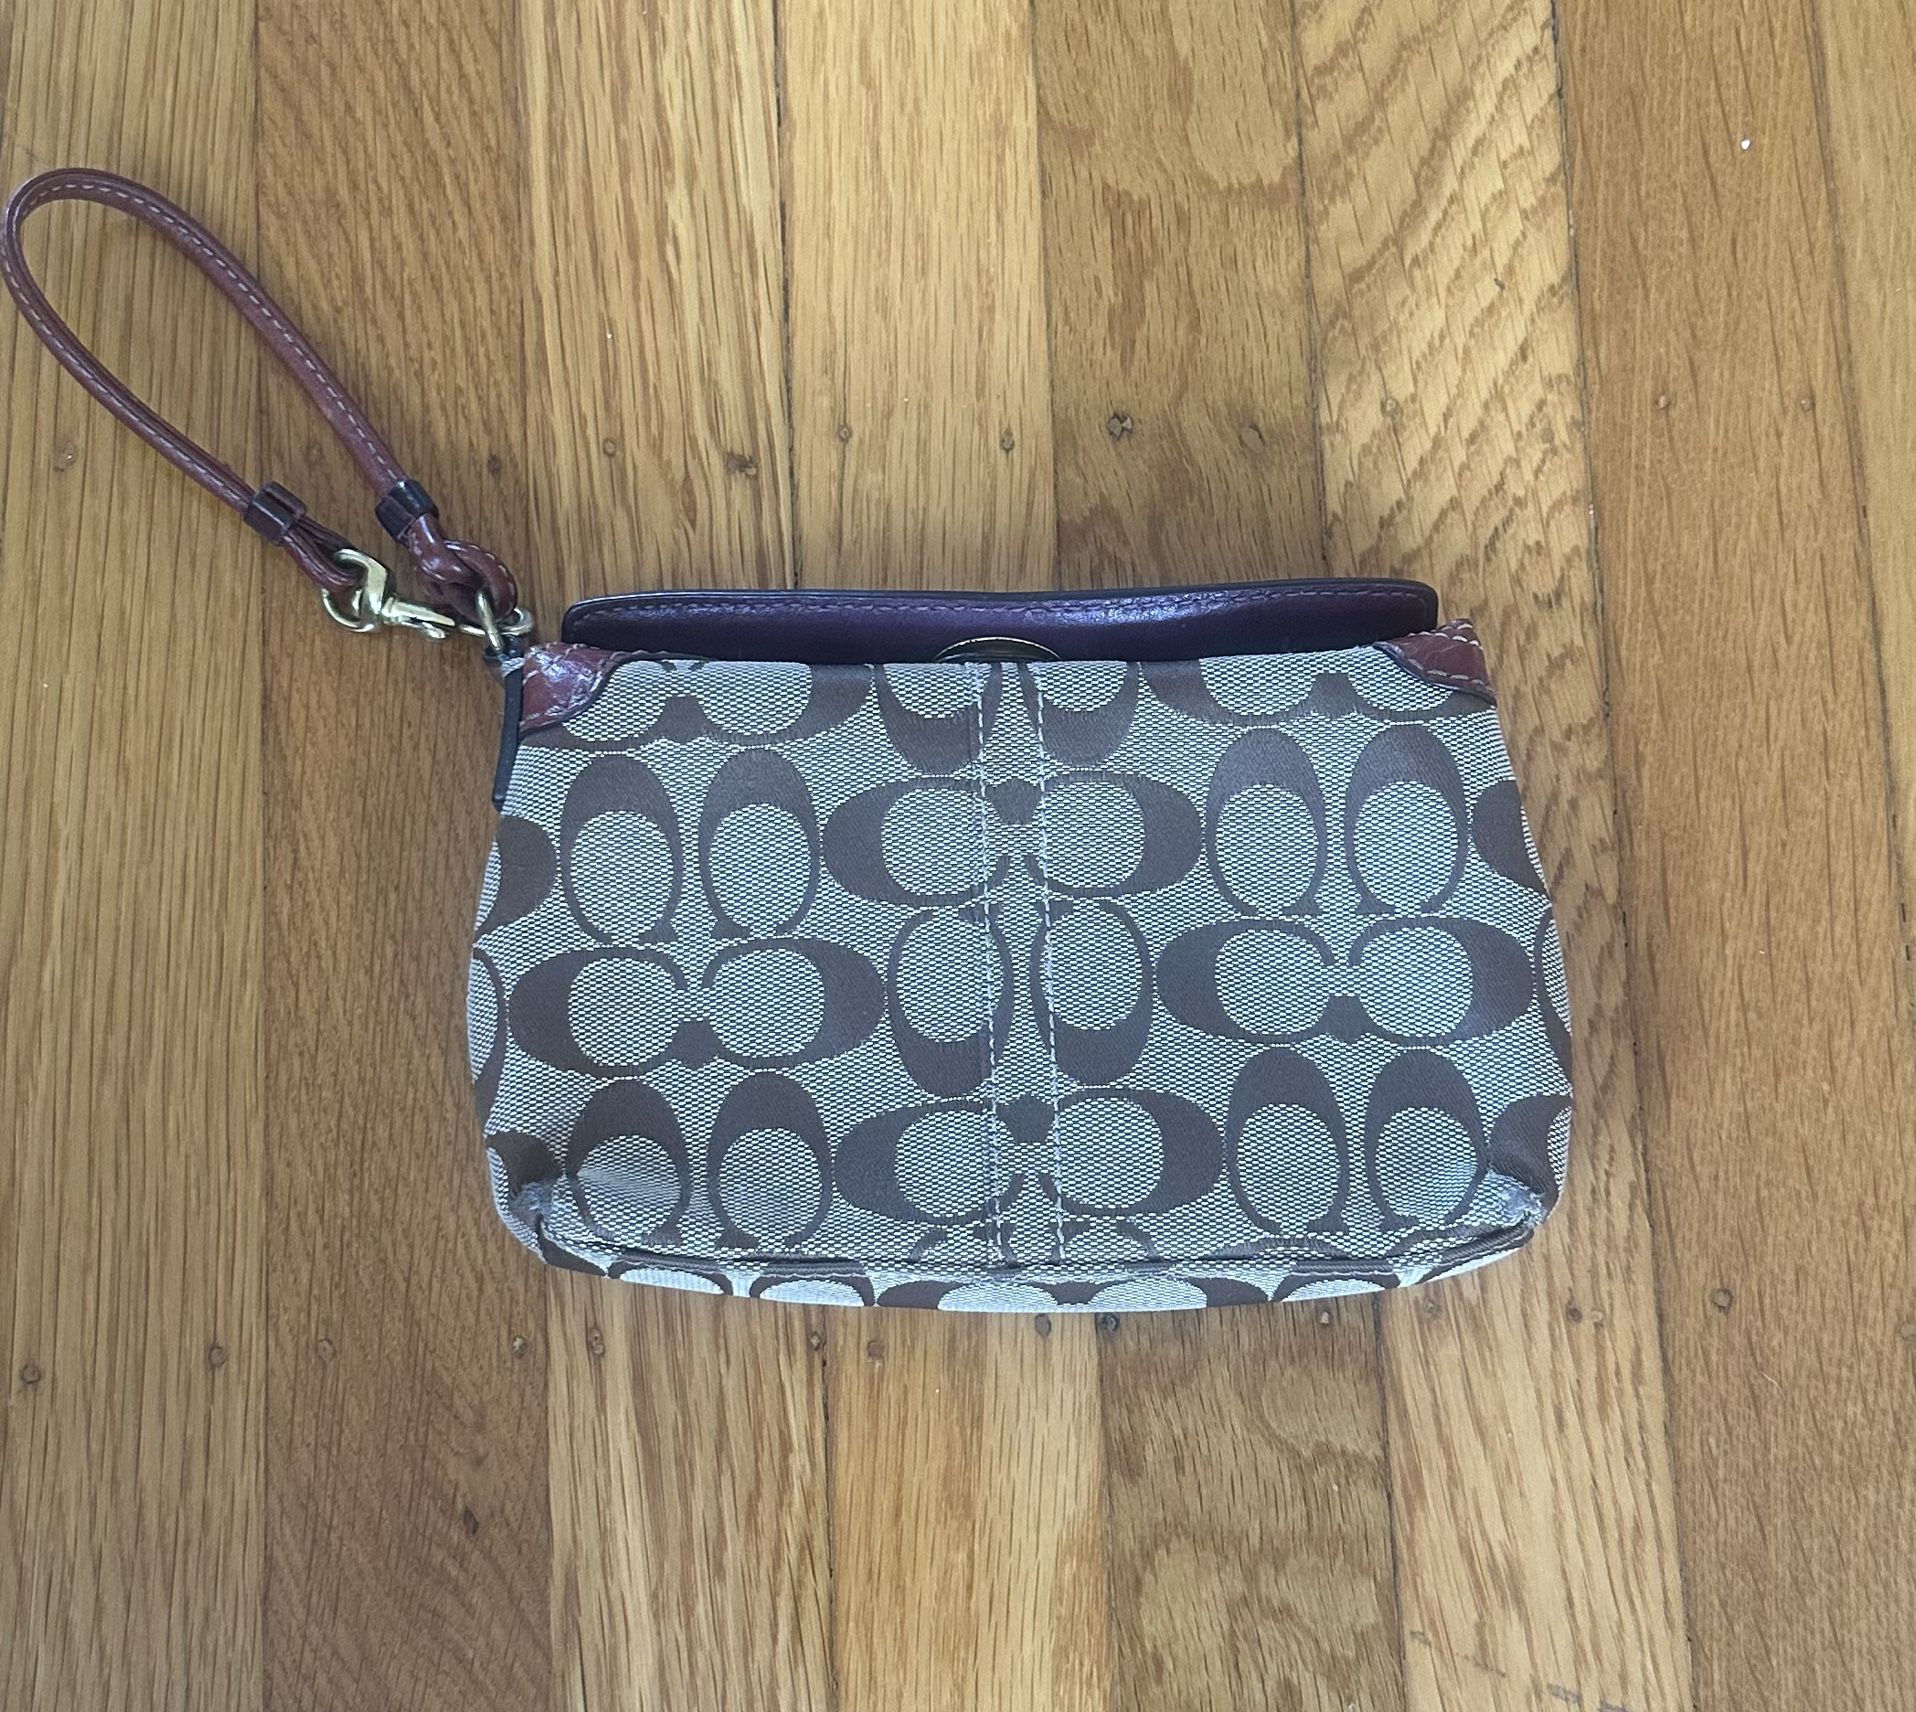 Coach canvas and leather logo bag/wristlet